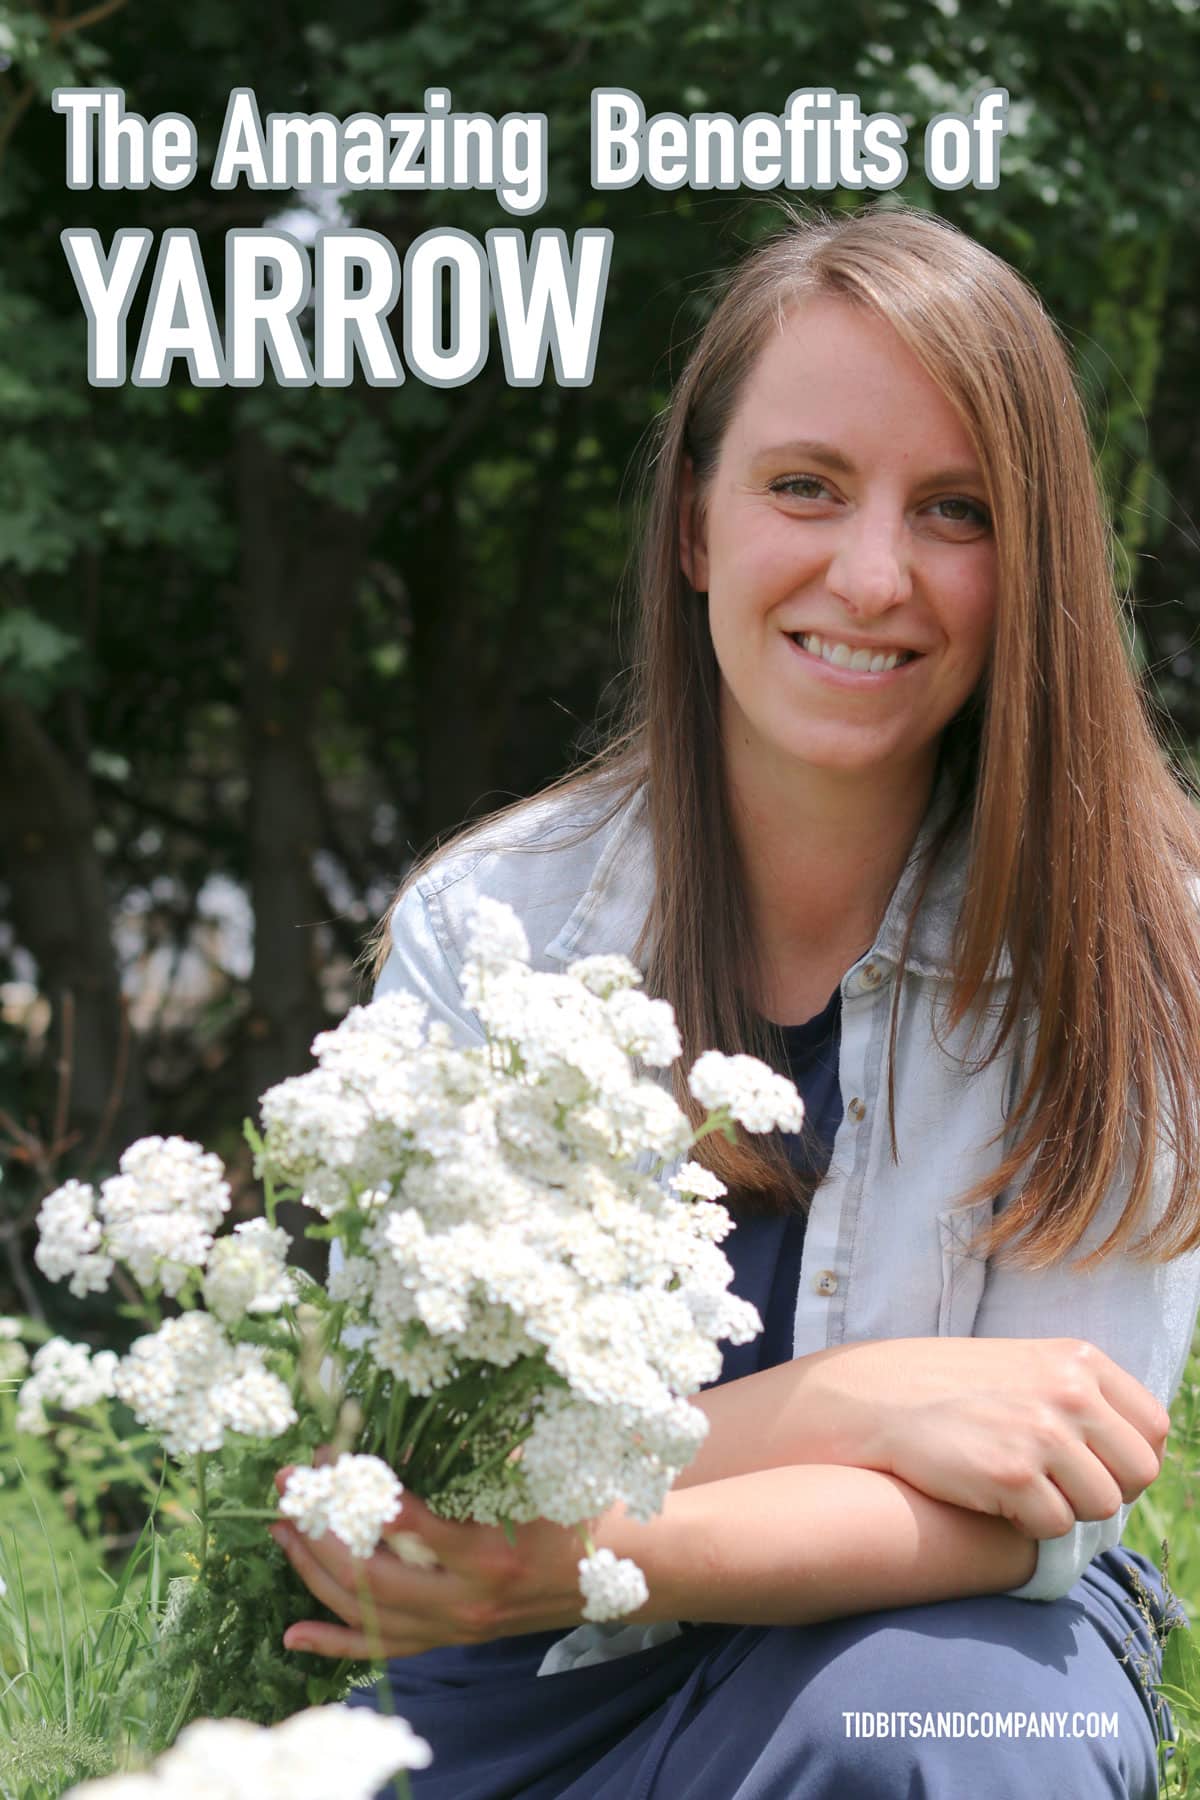 Woman pictured with white yarrow flowers